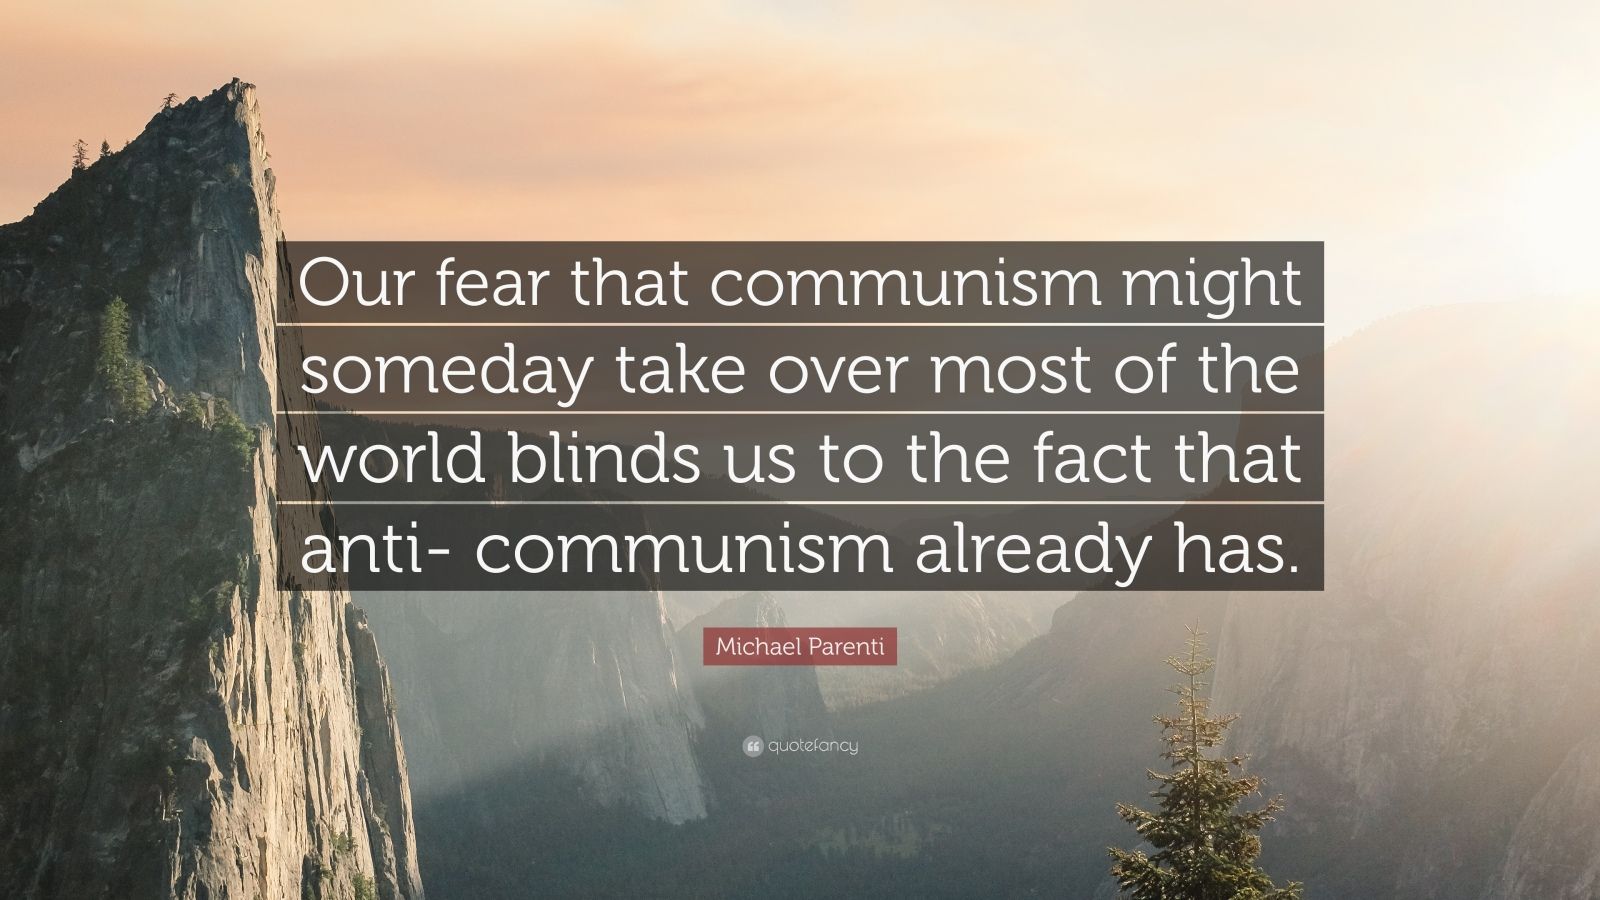 Michael Parenti Quote: "Our fear that communism might someday take over most of the world blinds ...